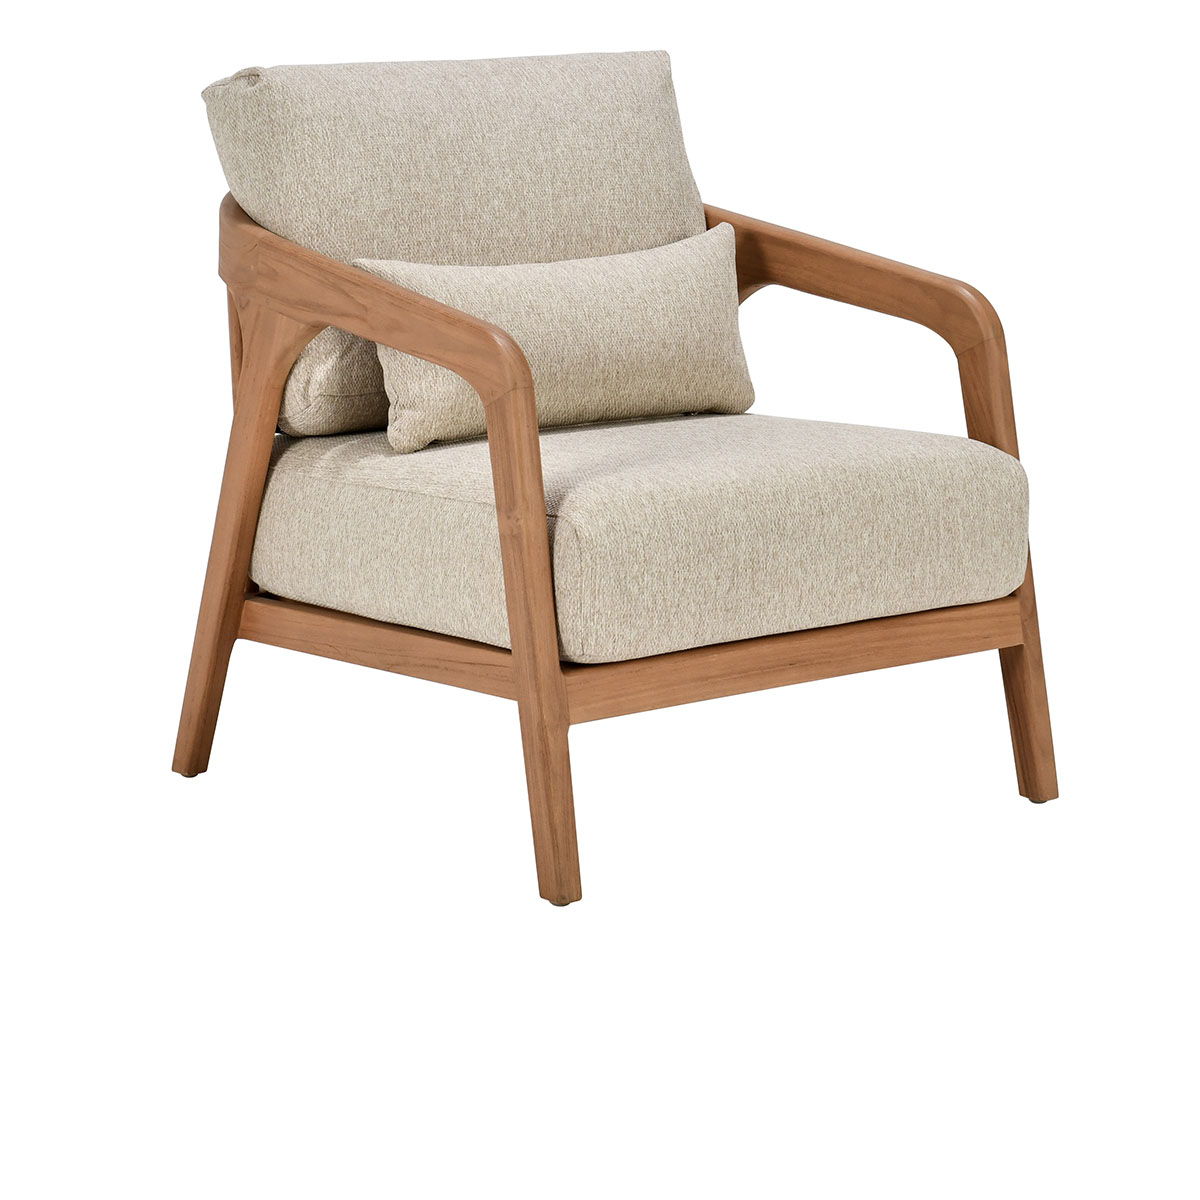 Lisa - Outdoor Accent Chair - Natural/Sand